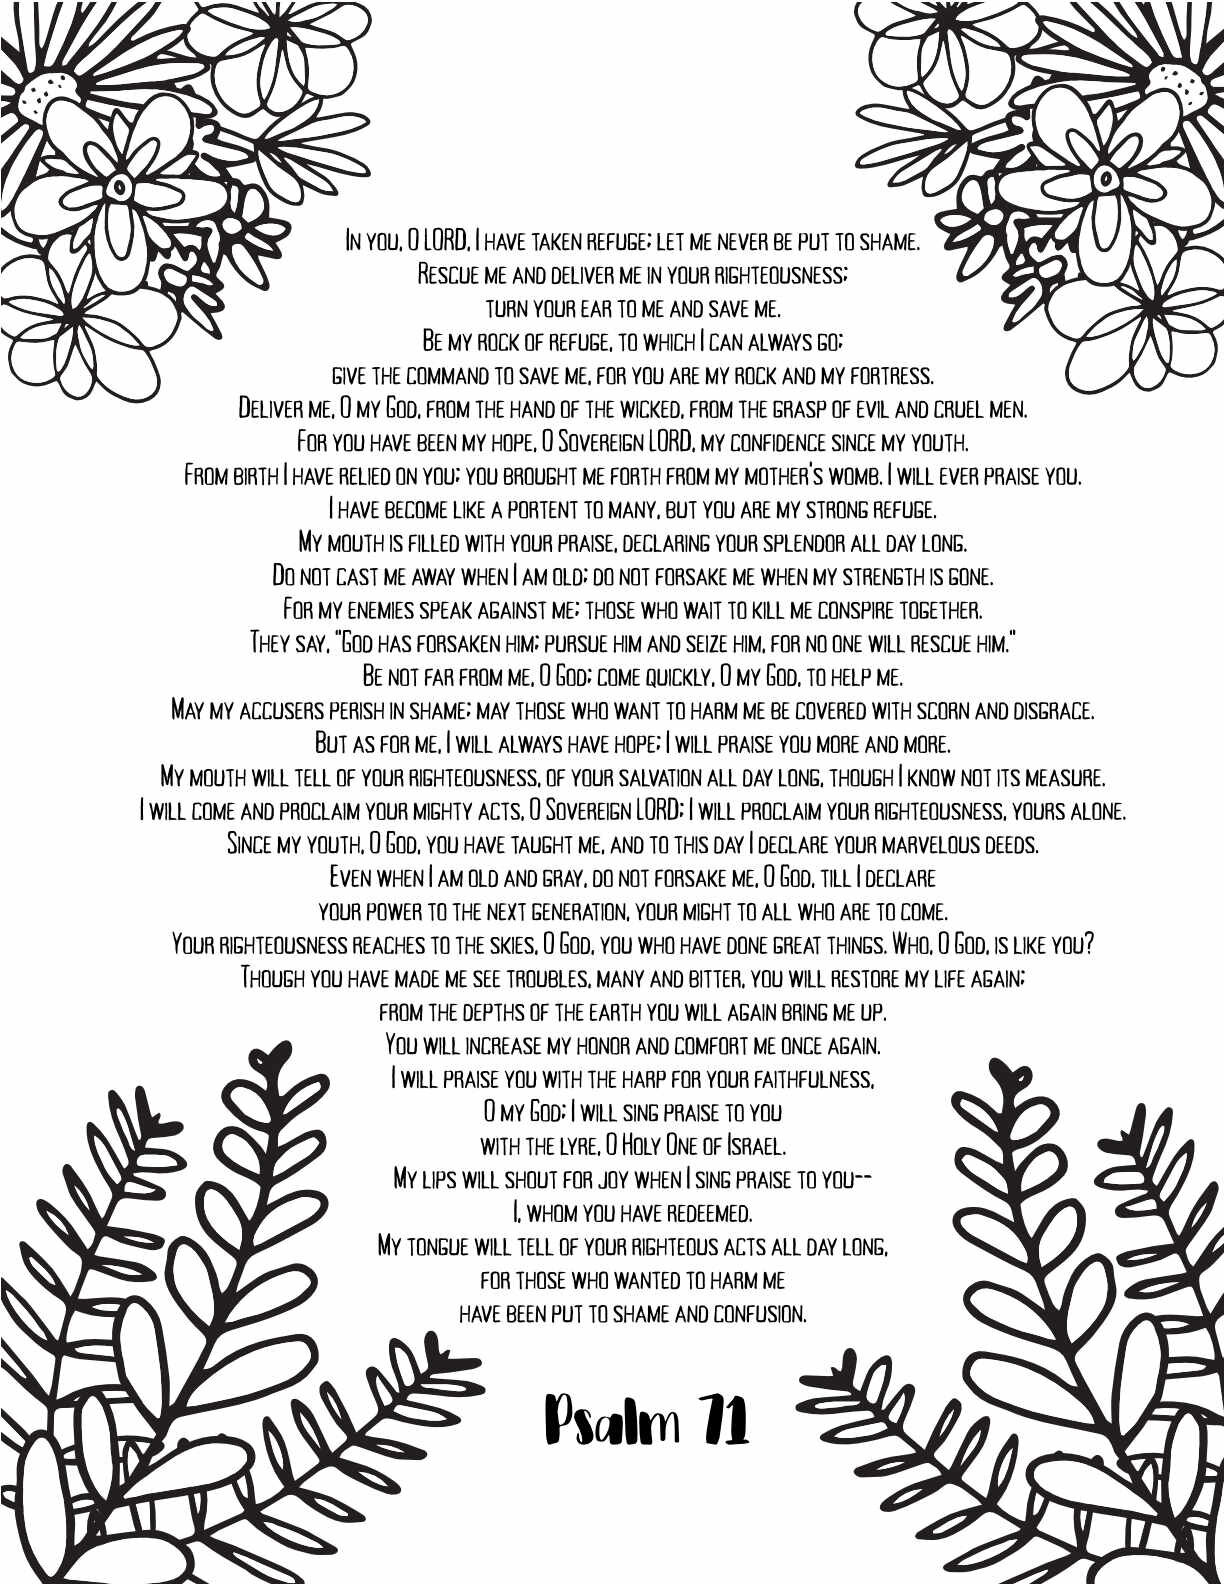 10 Free Printable Psalm Coloring Pages - Download and Color Adult Scripture - Psalm 71CLICK HERE TO DOWNLOAD THIS PAGE FREE